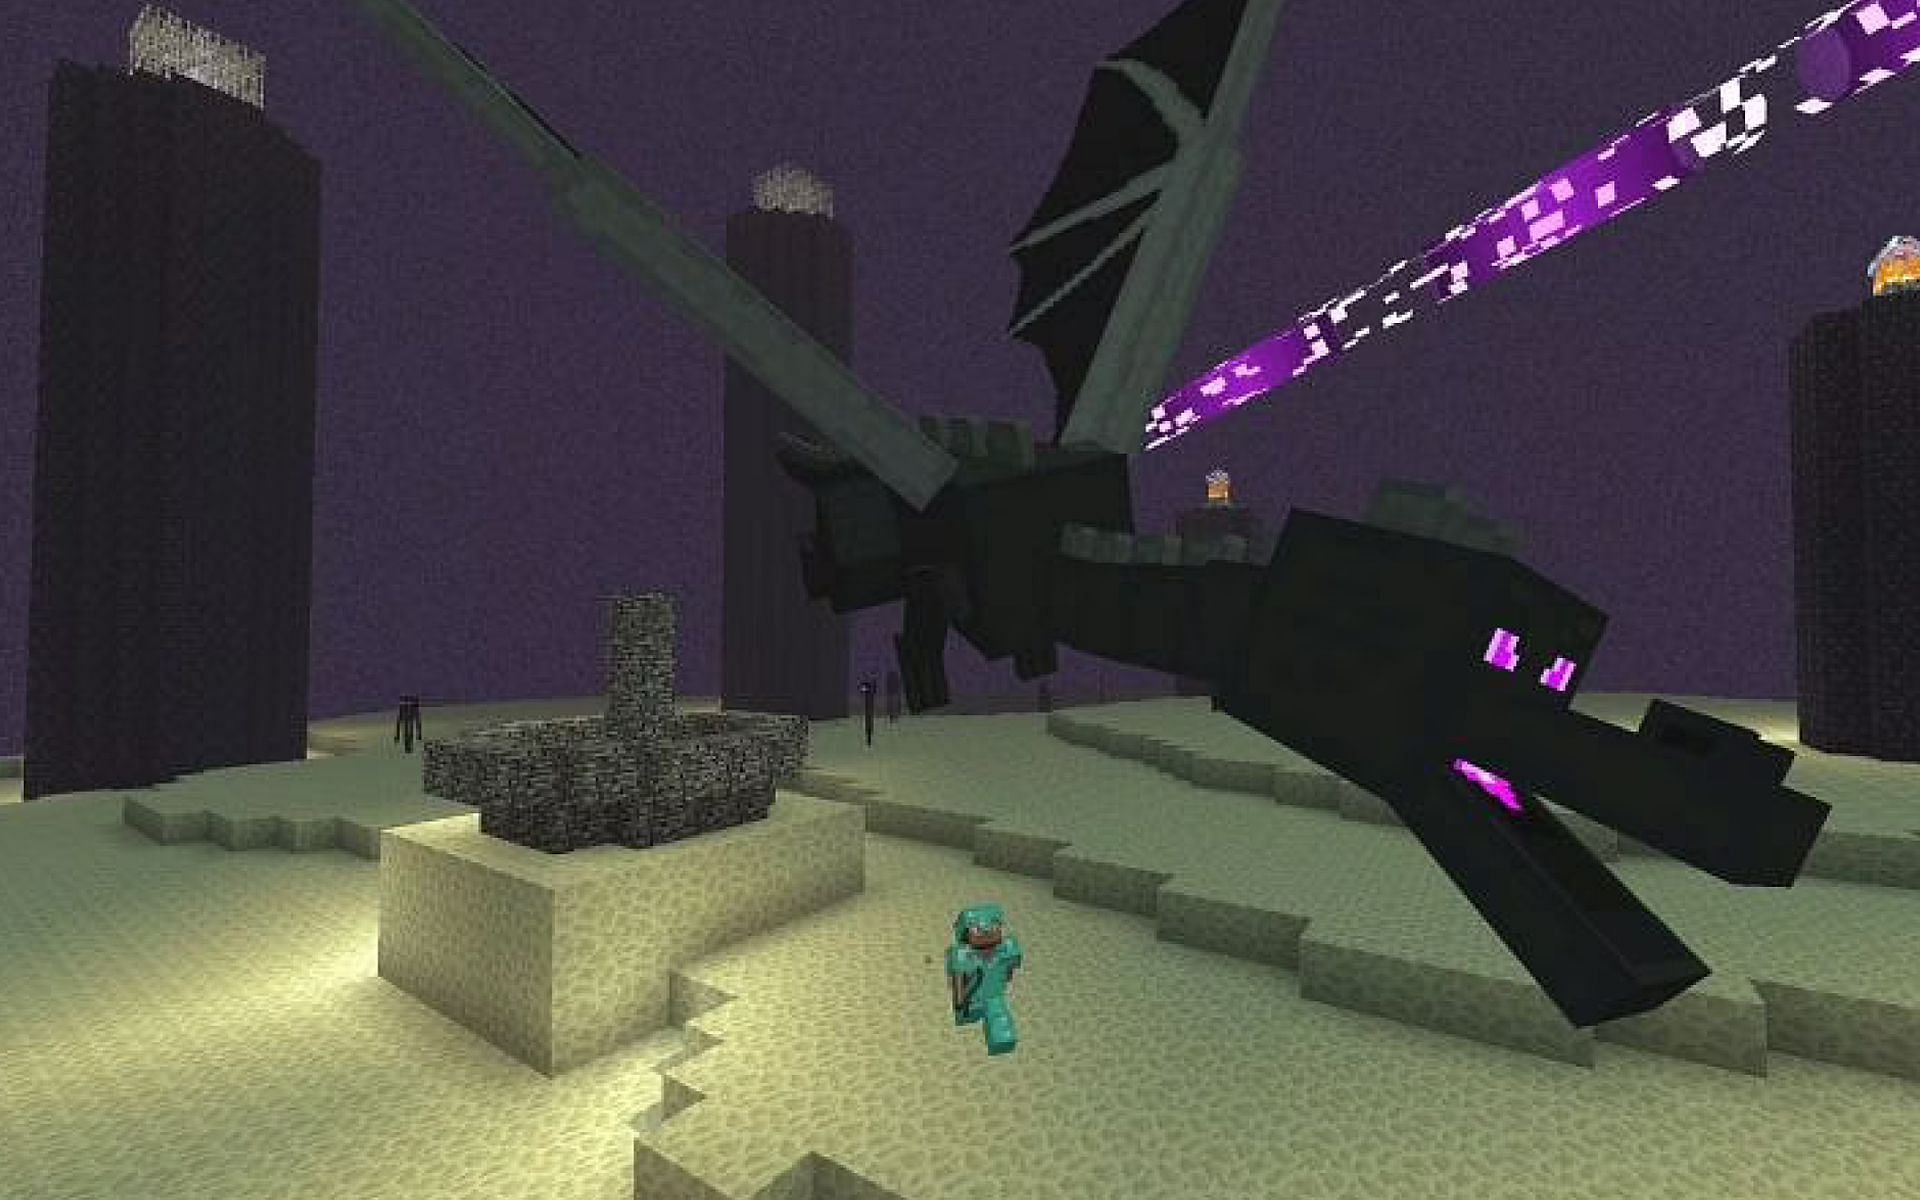 Slaying the Ender dragon is one of the most difficult parts of speedrunning. (Image via Minecraft)